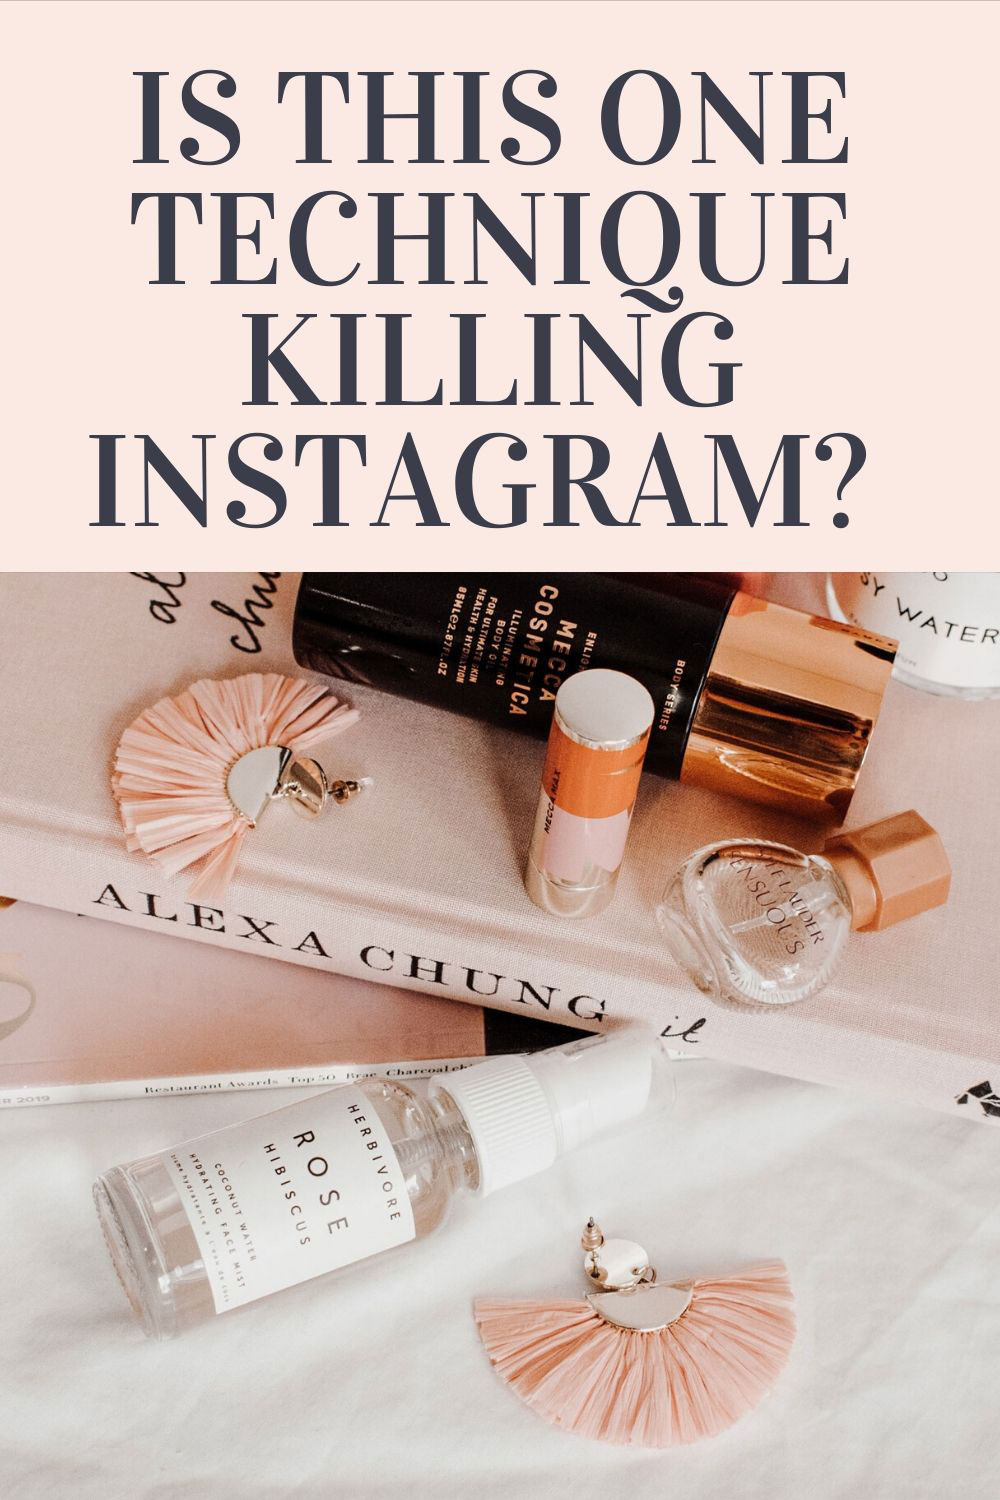 Is this one technique killing Instagram?